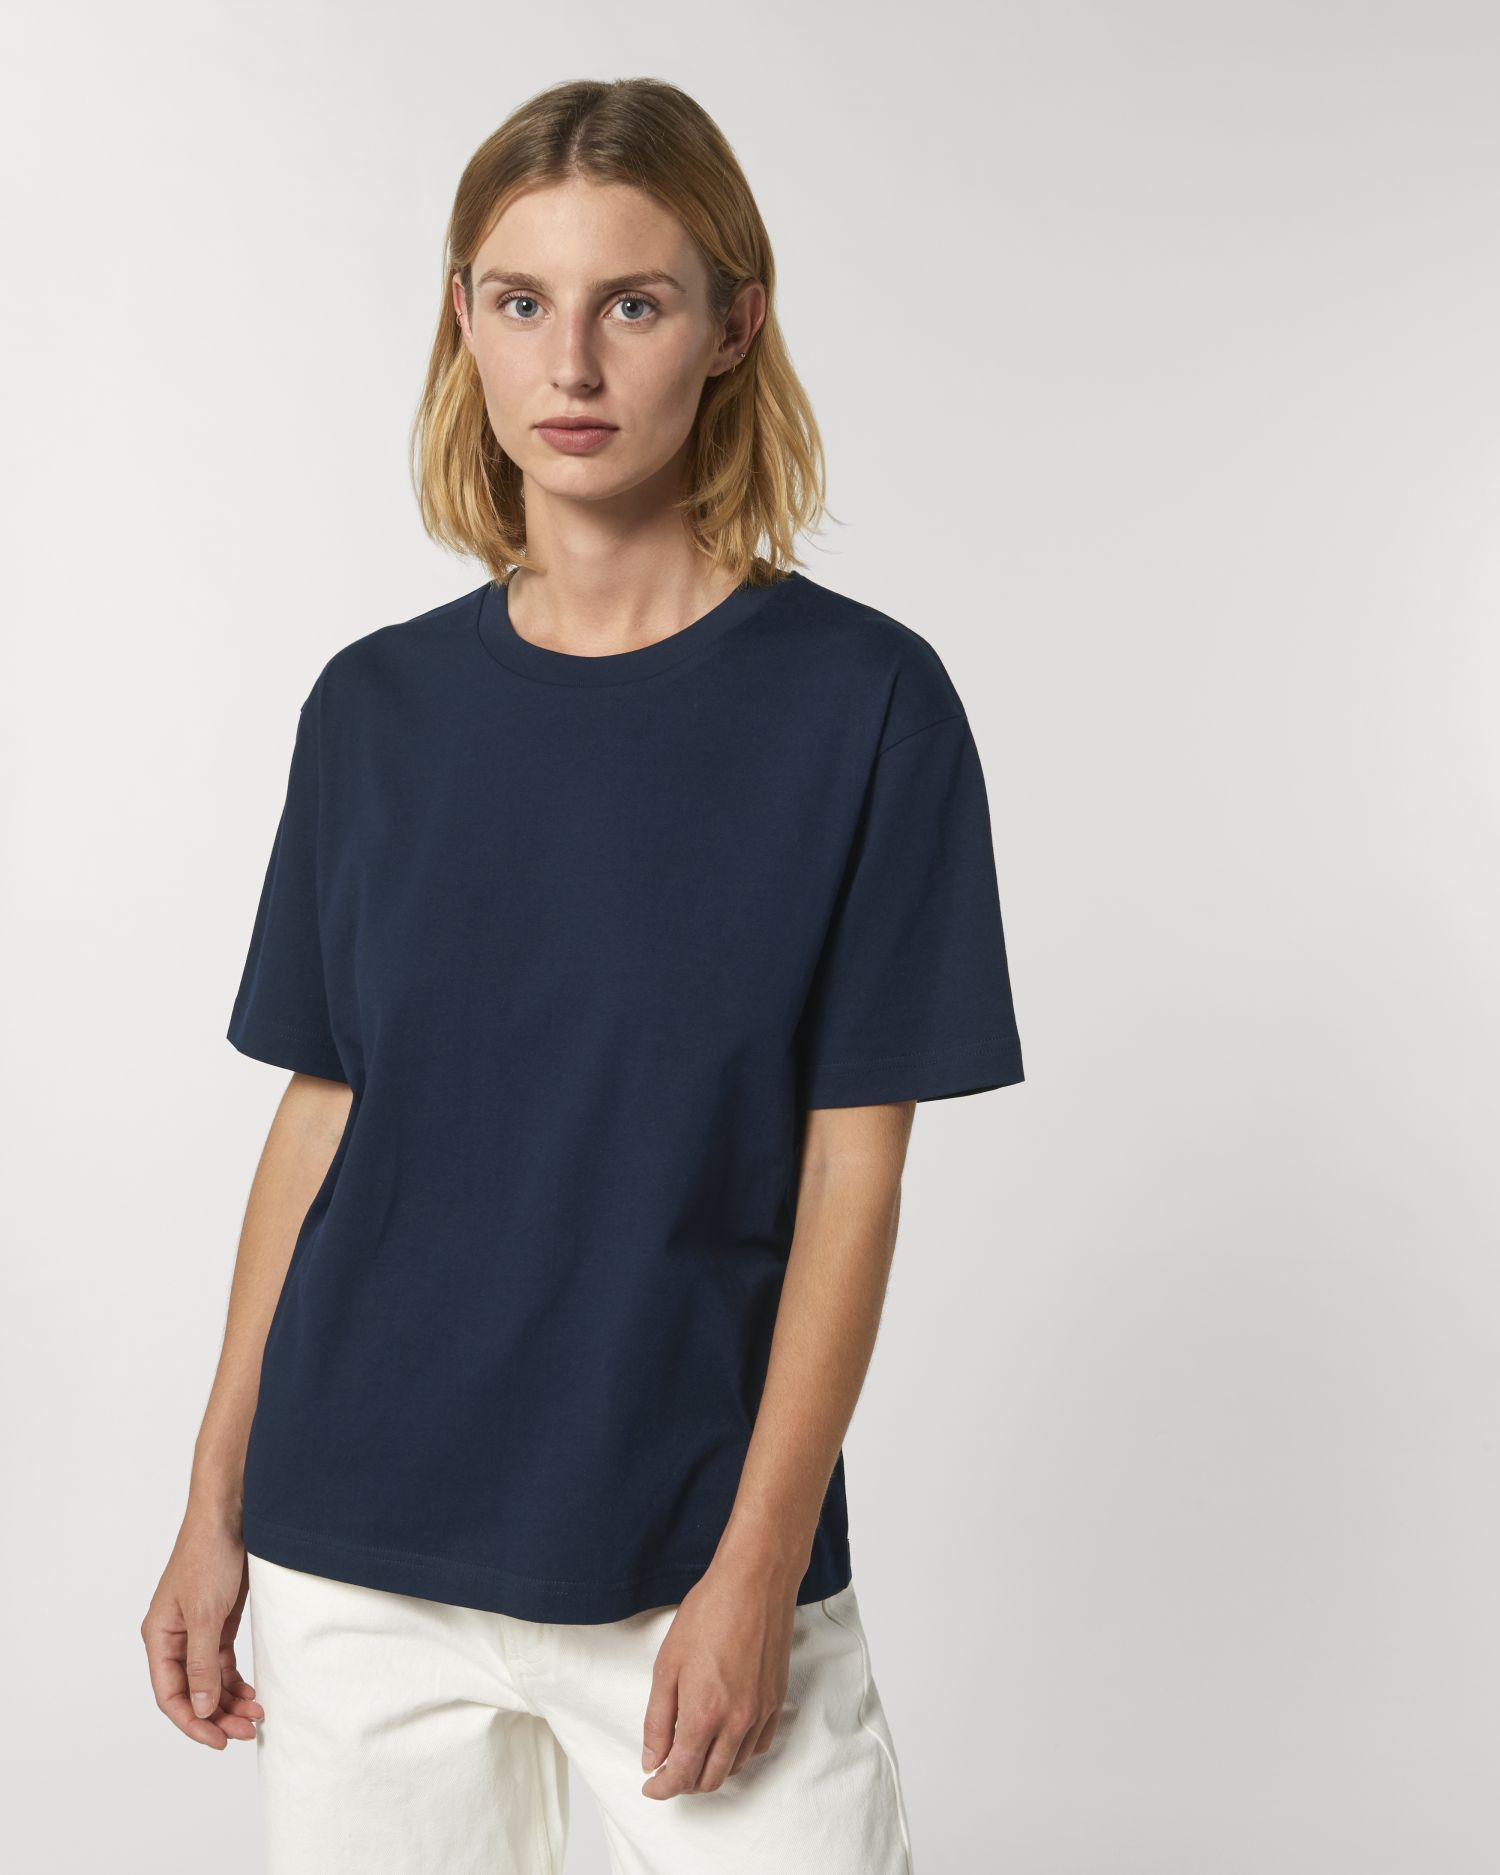 T-Shirt Fuser in Farbe French Navy